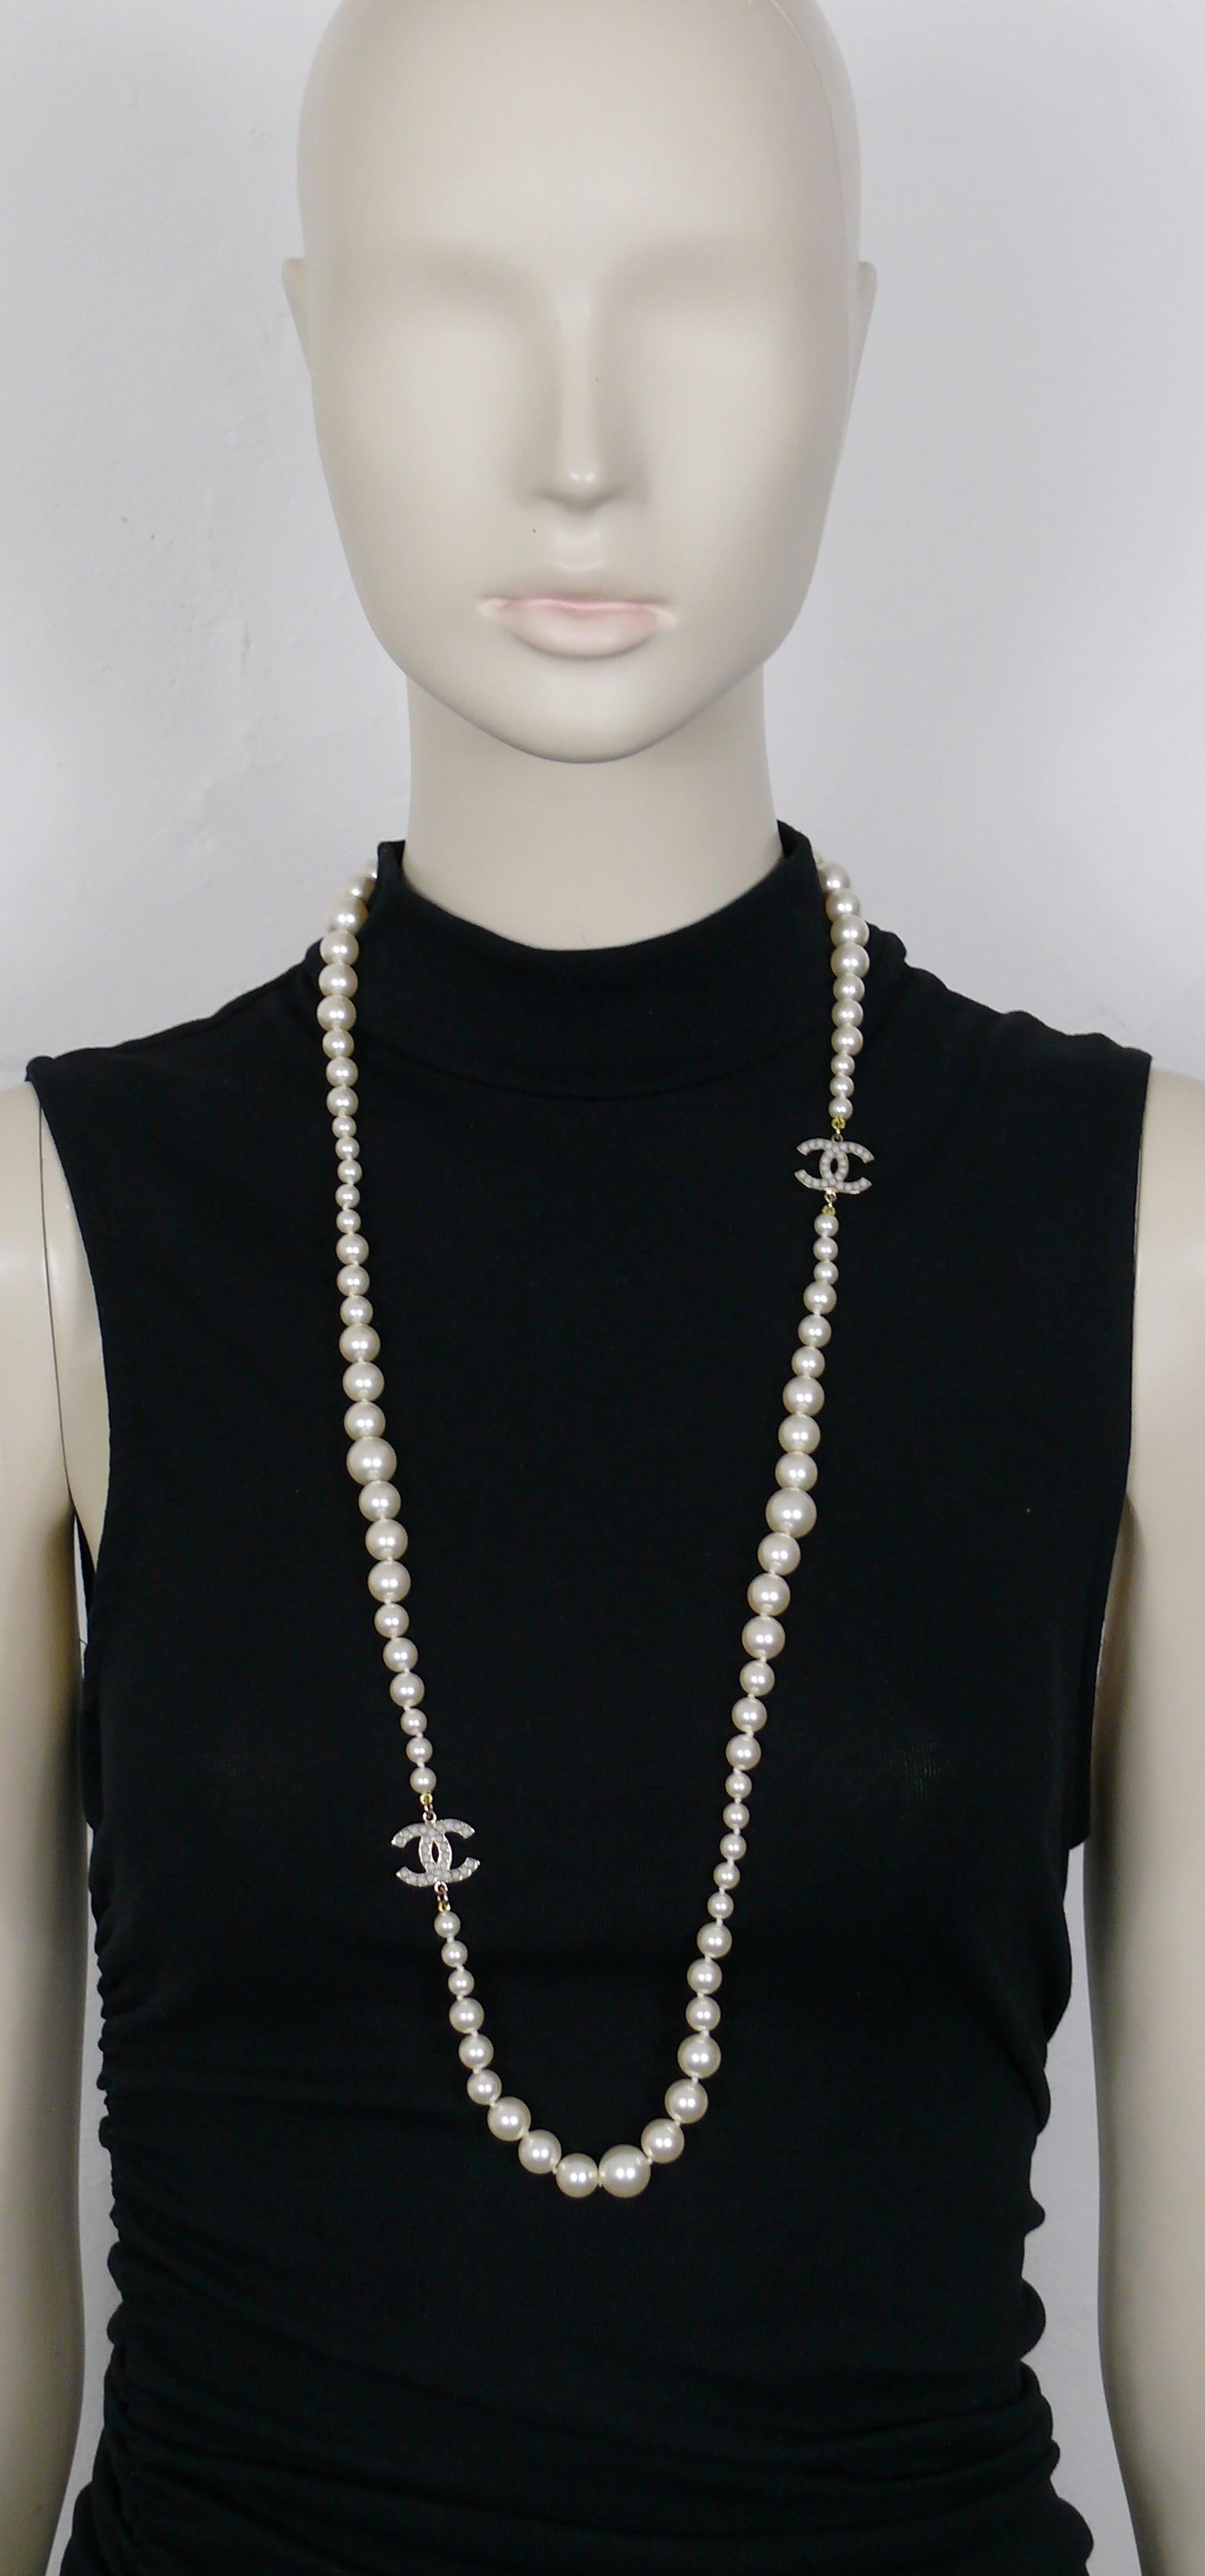 CHANEL classic graduated knotted cream glass pearl necklace featuring two pale gold toned CC logos embellished with little white resin beads.

Lobster clasp closure.

Embossed CHANEL A11 V MADE IN FRANCE.

Indicative measurements : length approx. 88